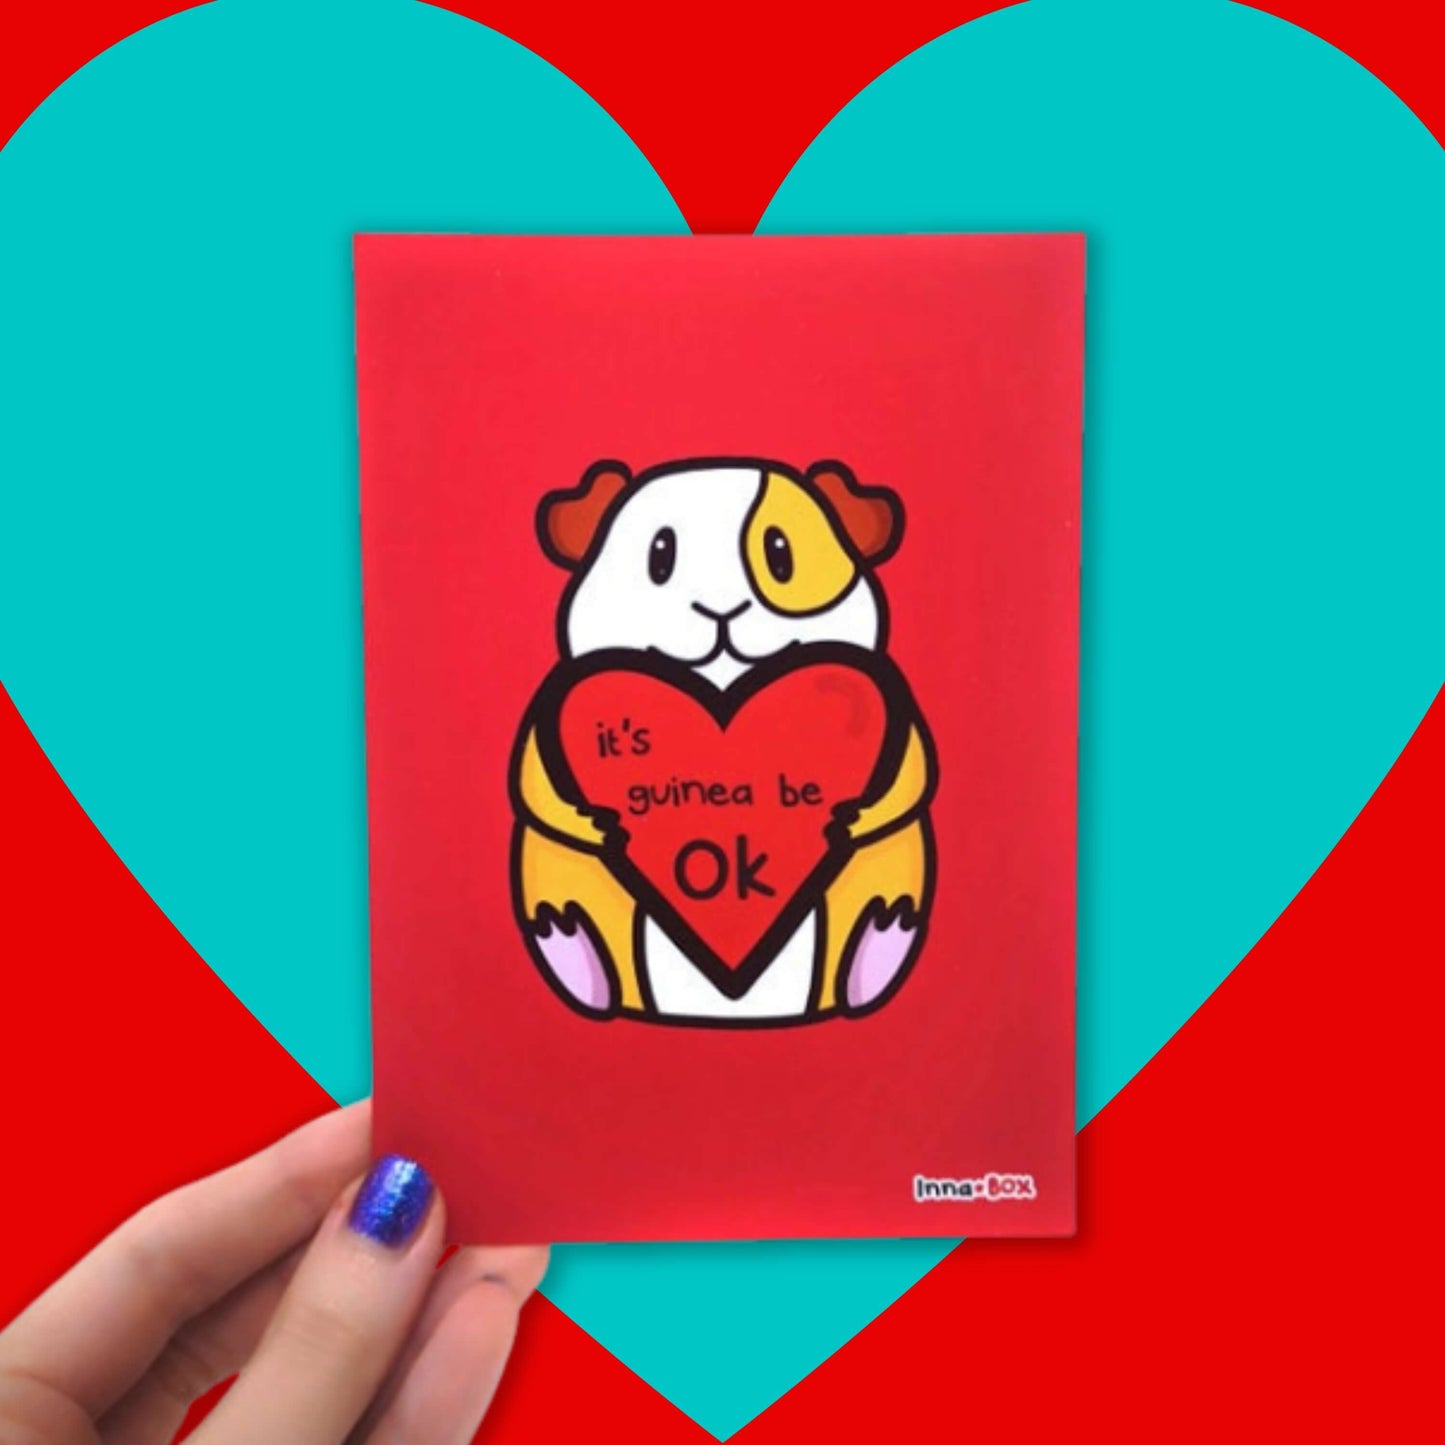 The It's Gonna Be OK Guinea Pig Postcard being held over a red and blue background. The red postcard print features a cute orange and white smiling guinea pig sat holding a red heart with black text reading 'it's guinea be ok'. The hand drawn design is a reminder for staying positive.